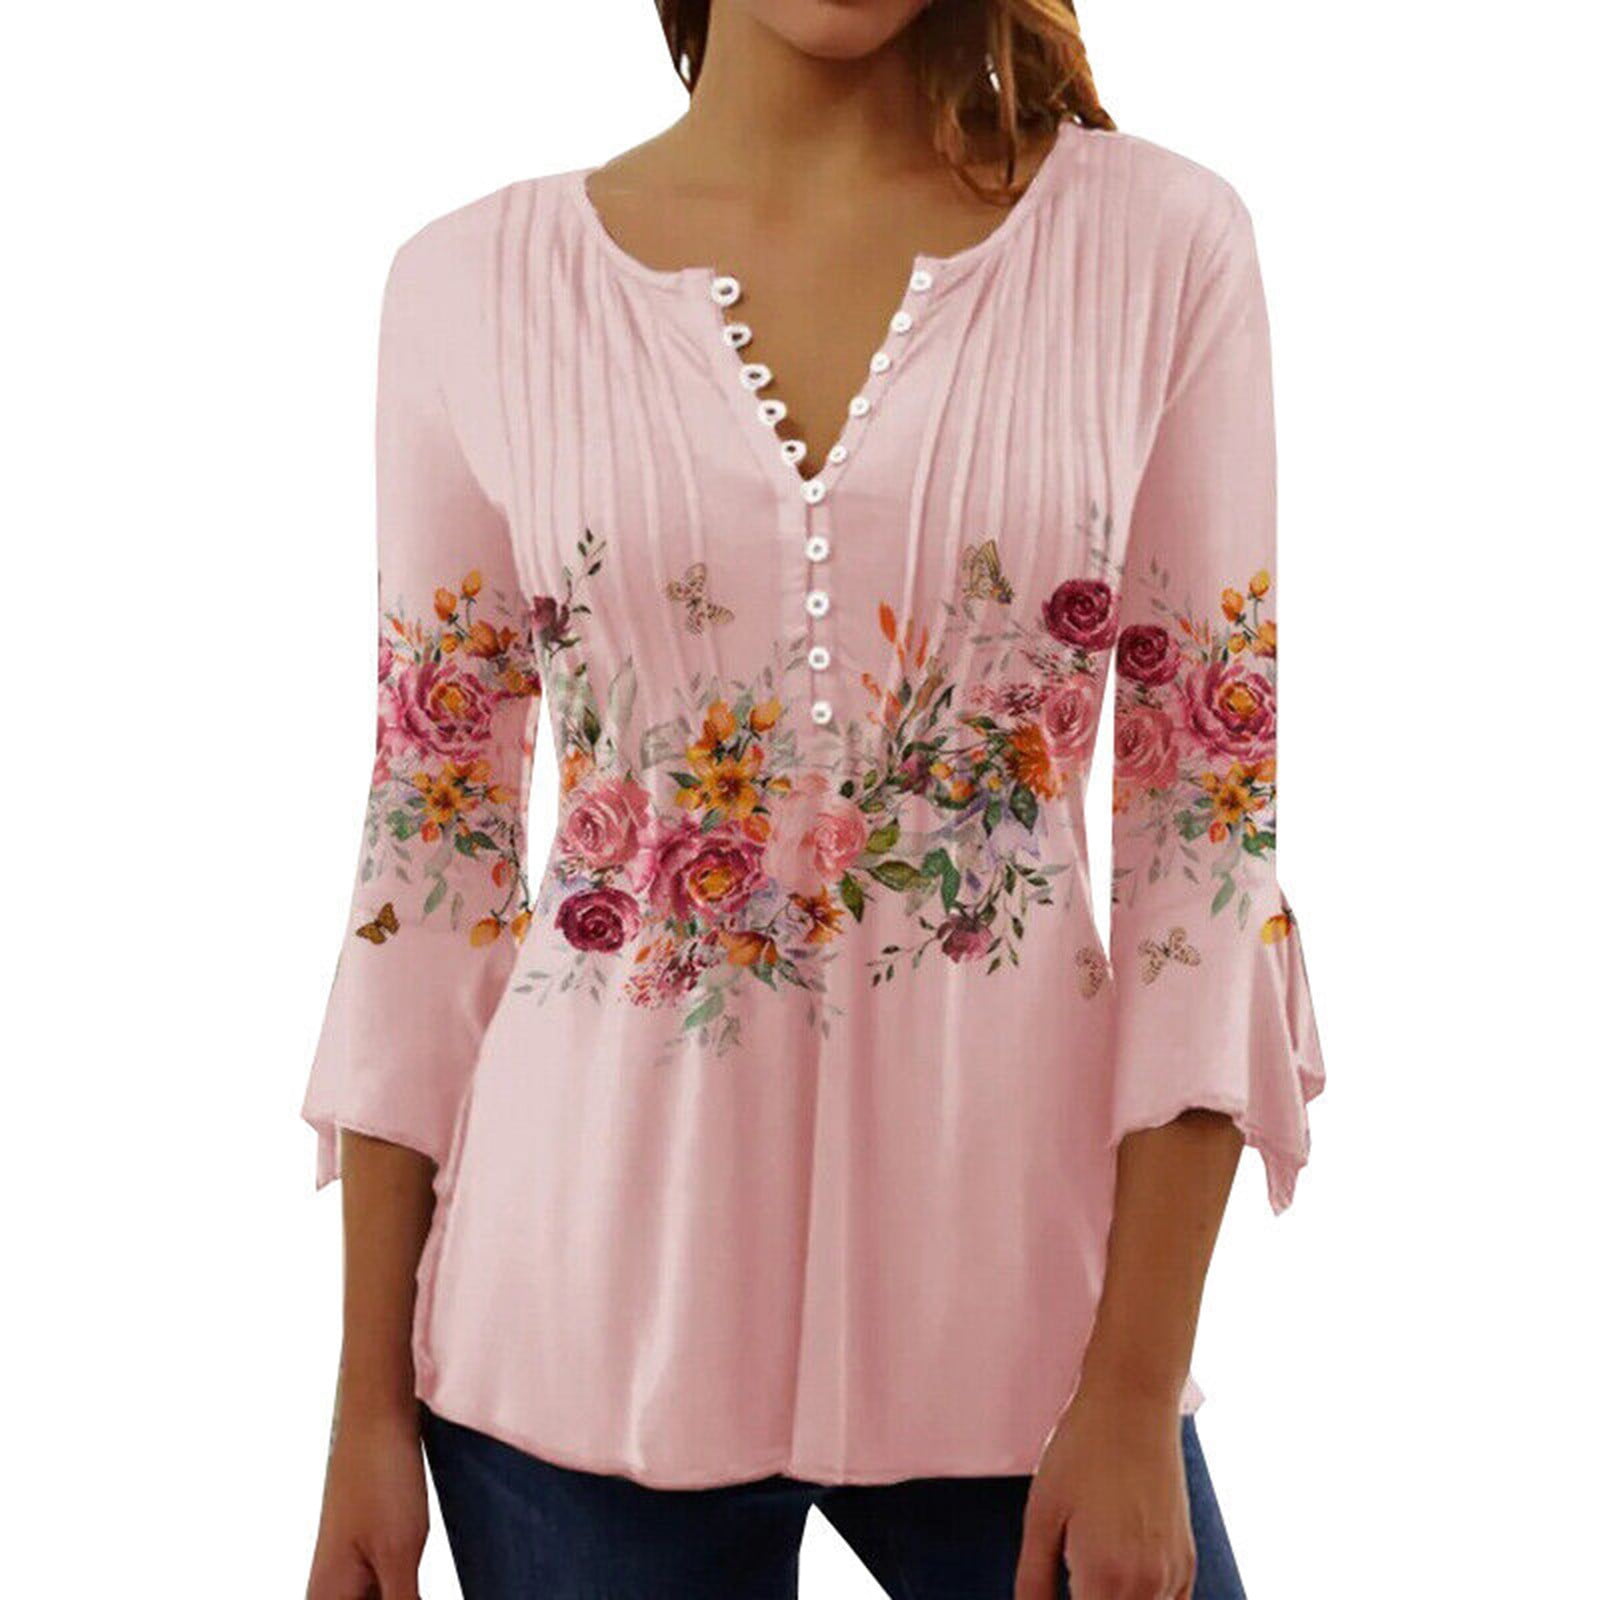 OVTICZA Boho Tops for Women Hippie 3/4 Sleeve Floral Blouses